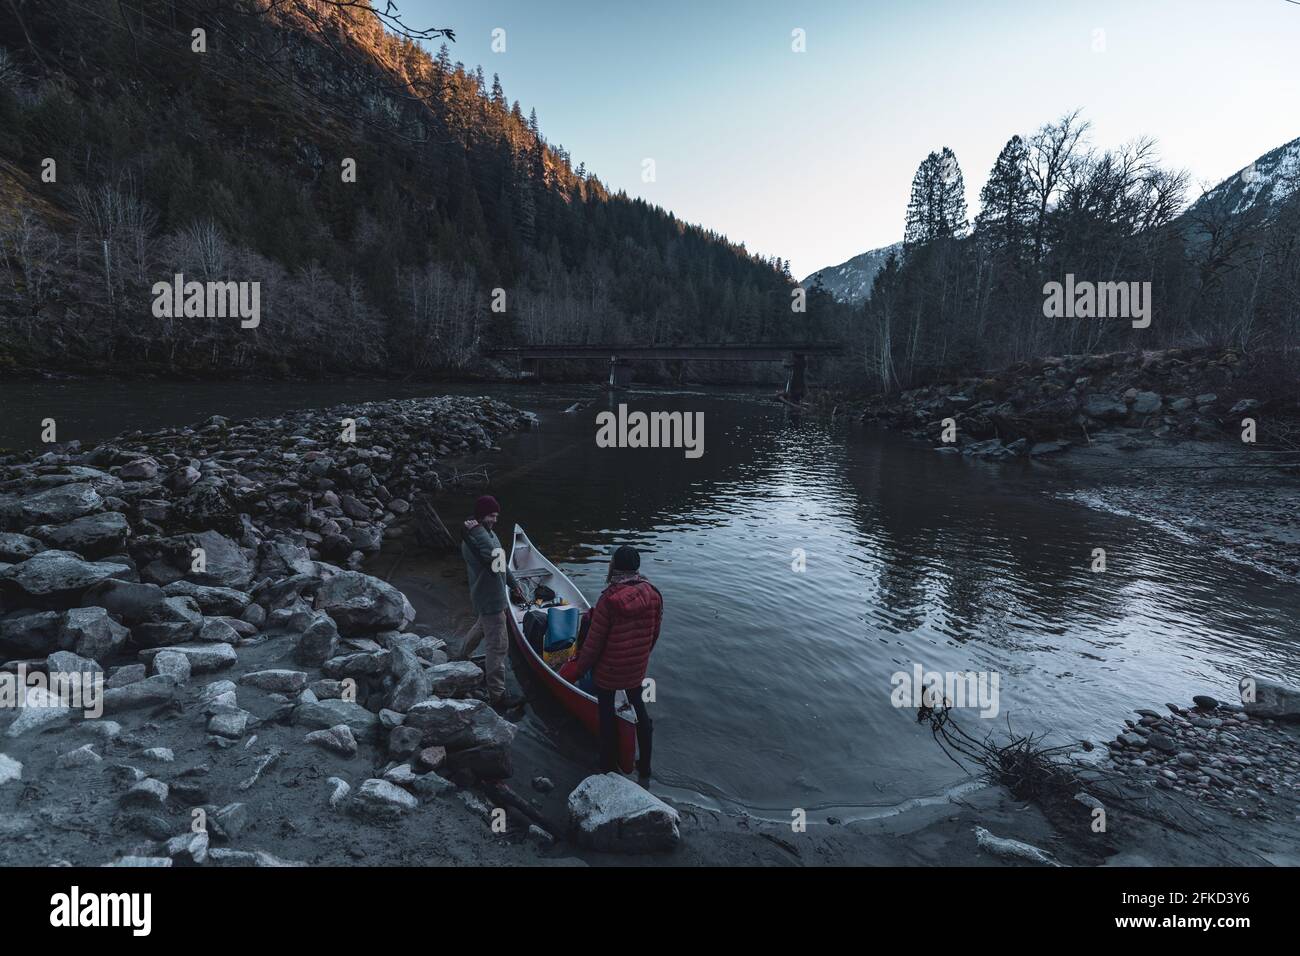 Canada, British Columbia, Man and woman canoeing in Squamish River Stock Photo